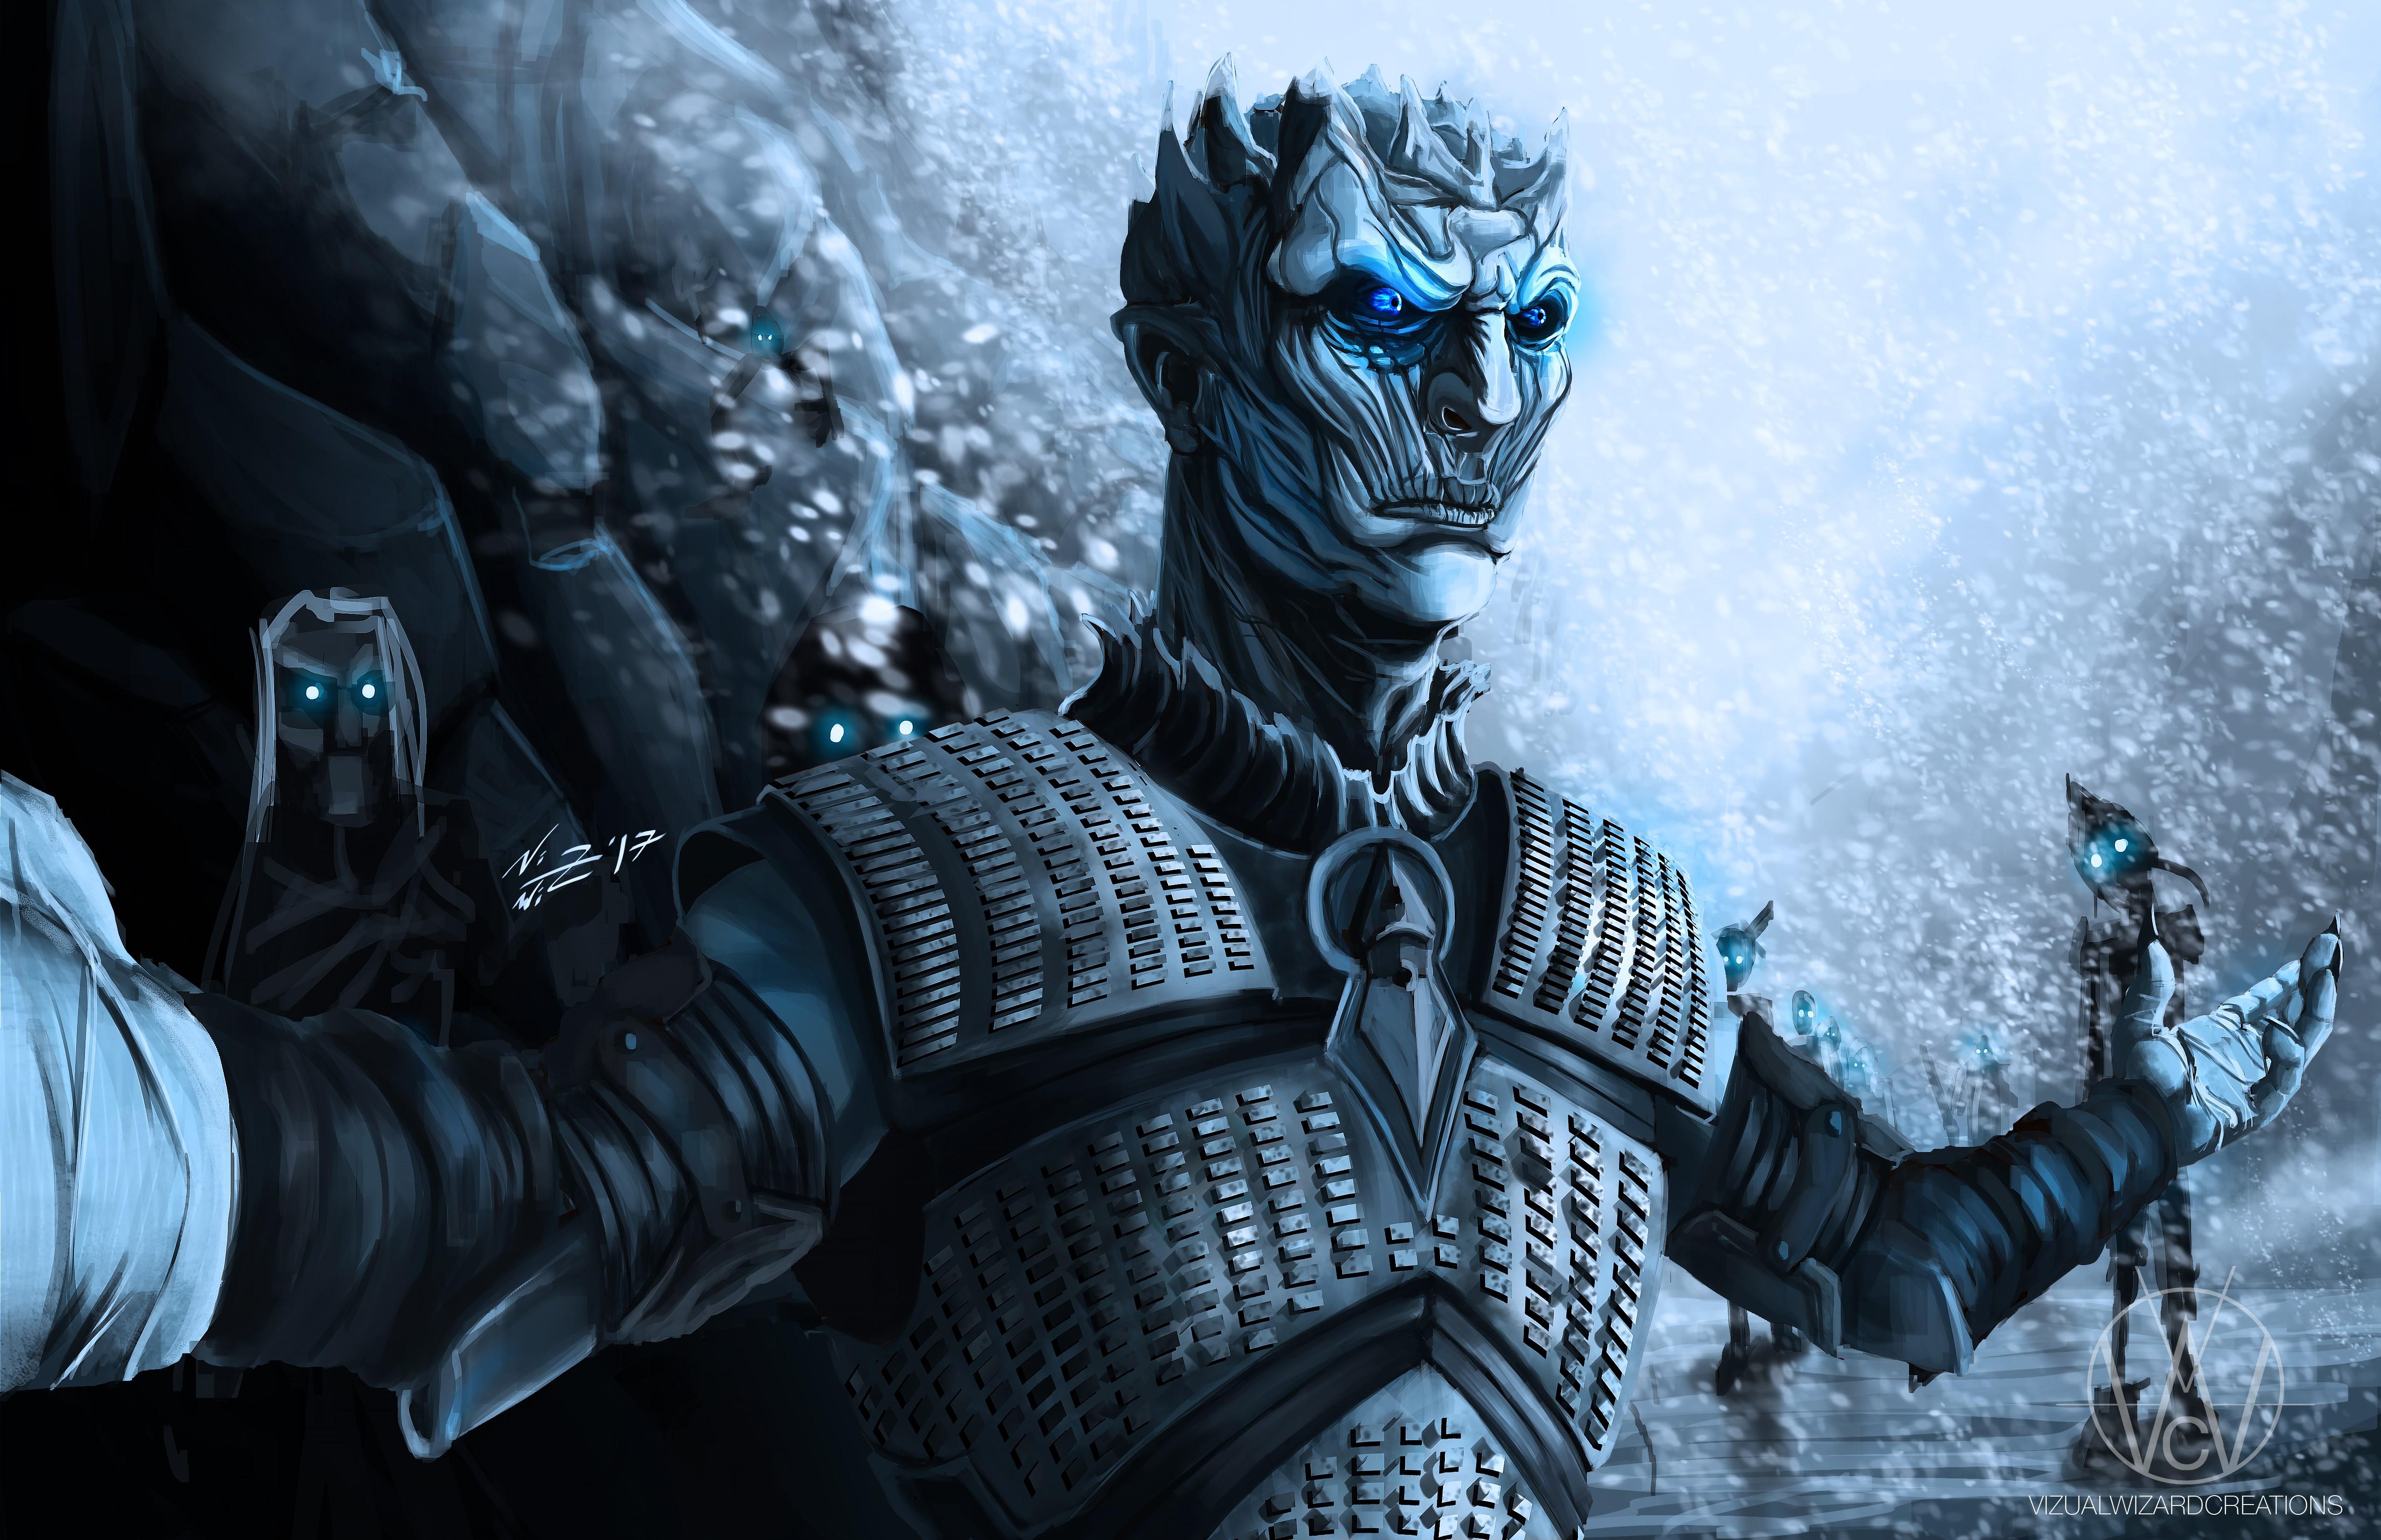 Wallpaper ID 80343 game of thrones night king white walkers